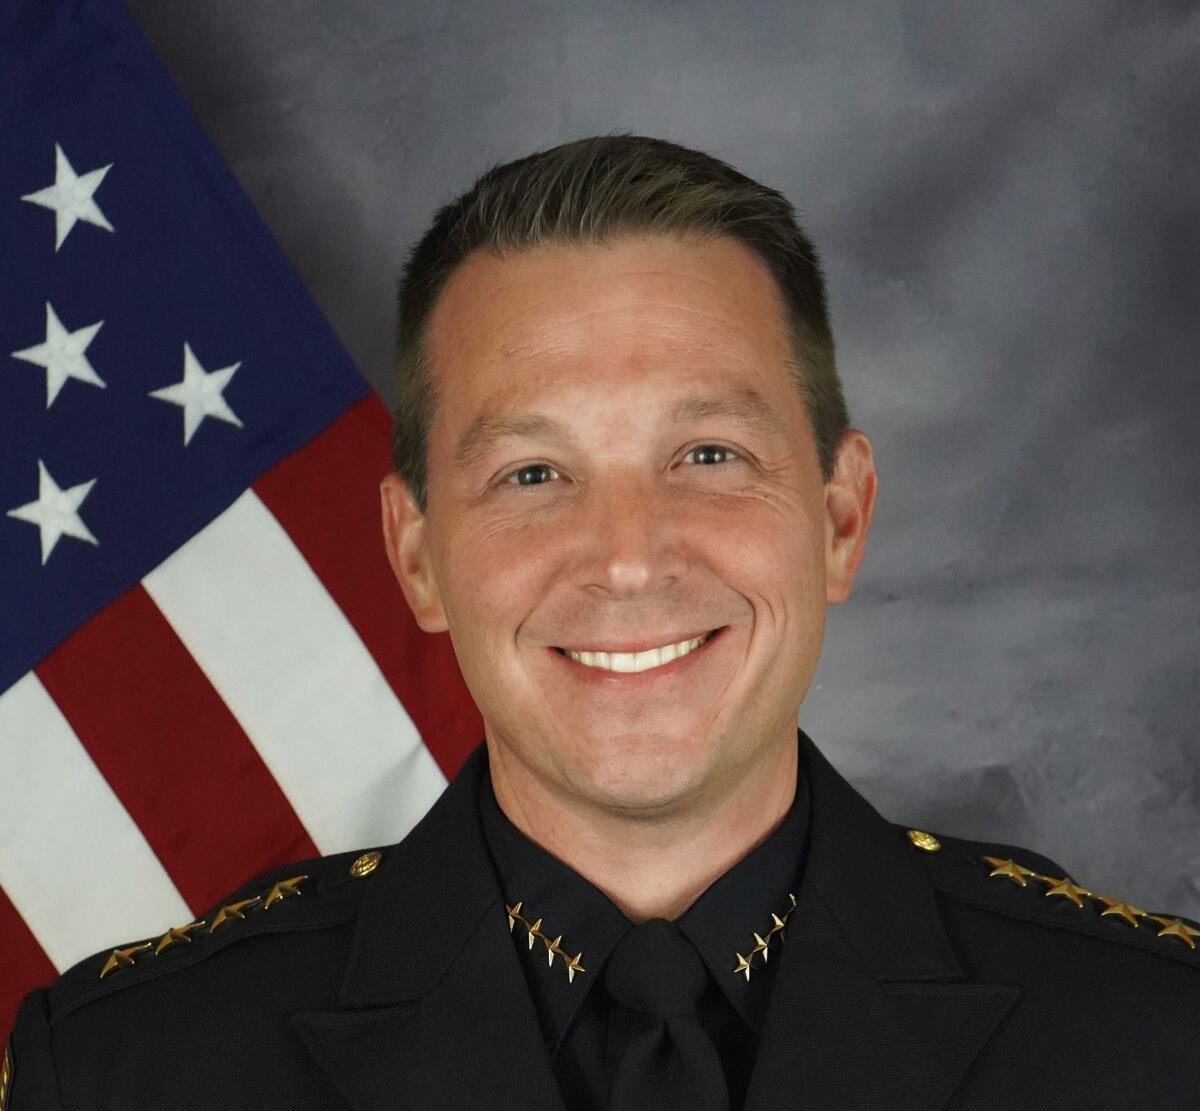 Robert Thompson has been hired by city officials to be the next police chief of the Laguna Beach Police Department.